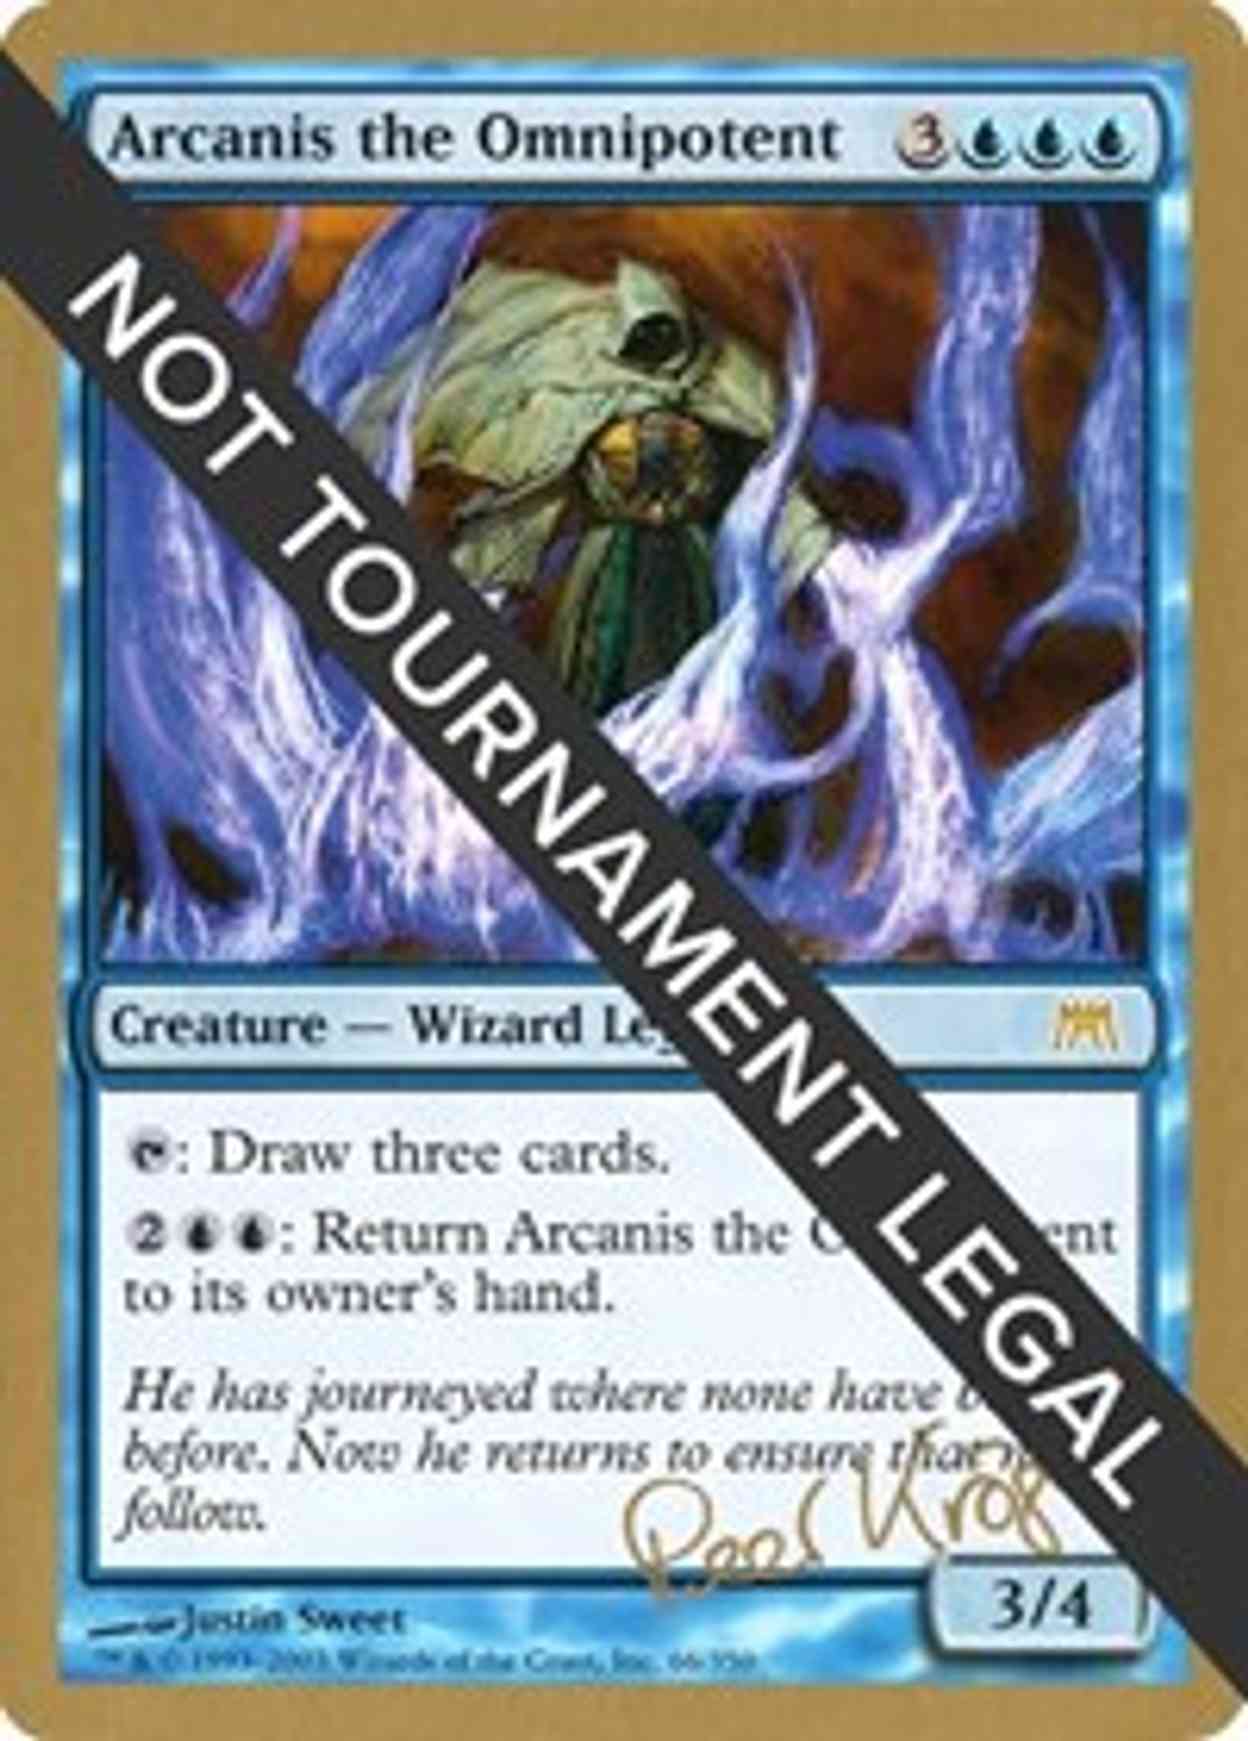 Arcanis the Omnipotent - 2003 Peer Kroger (ONS) magic card front